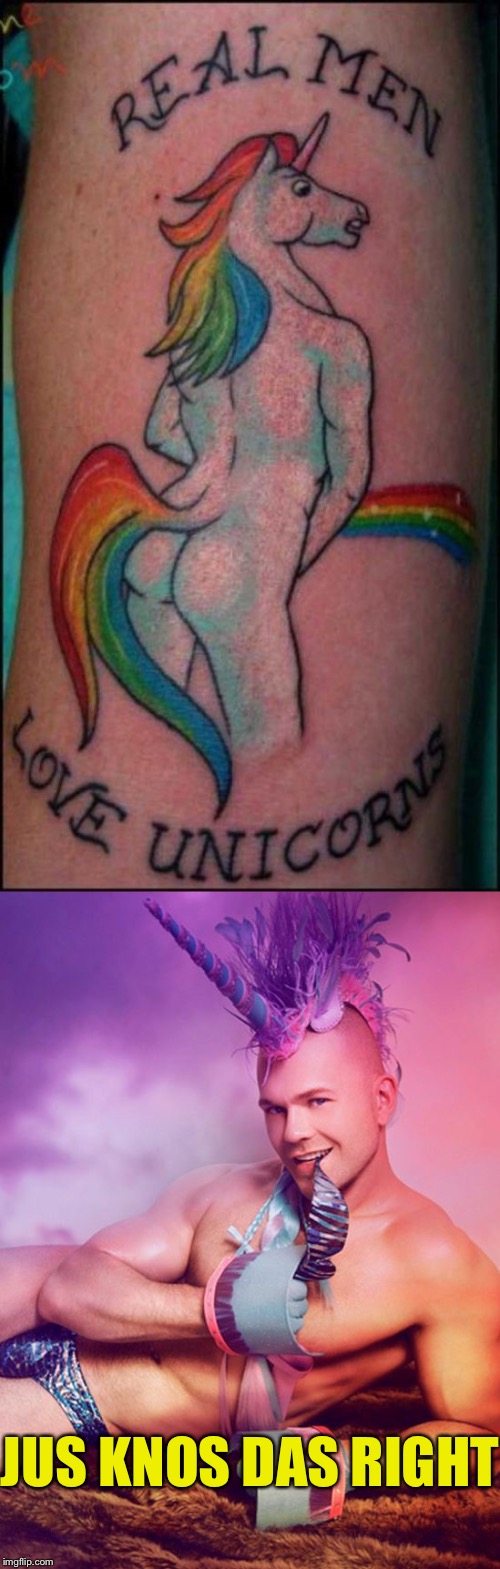 Real men love unicorns  | JUS KNOS DAS RIGHT | image tagged in tattoos,unicorn man,gay unicorn,funny memes | made w/ Imgflip meme maker